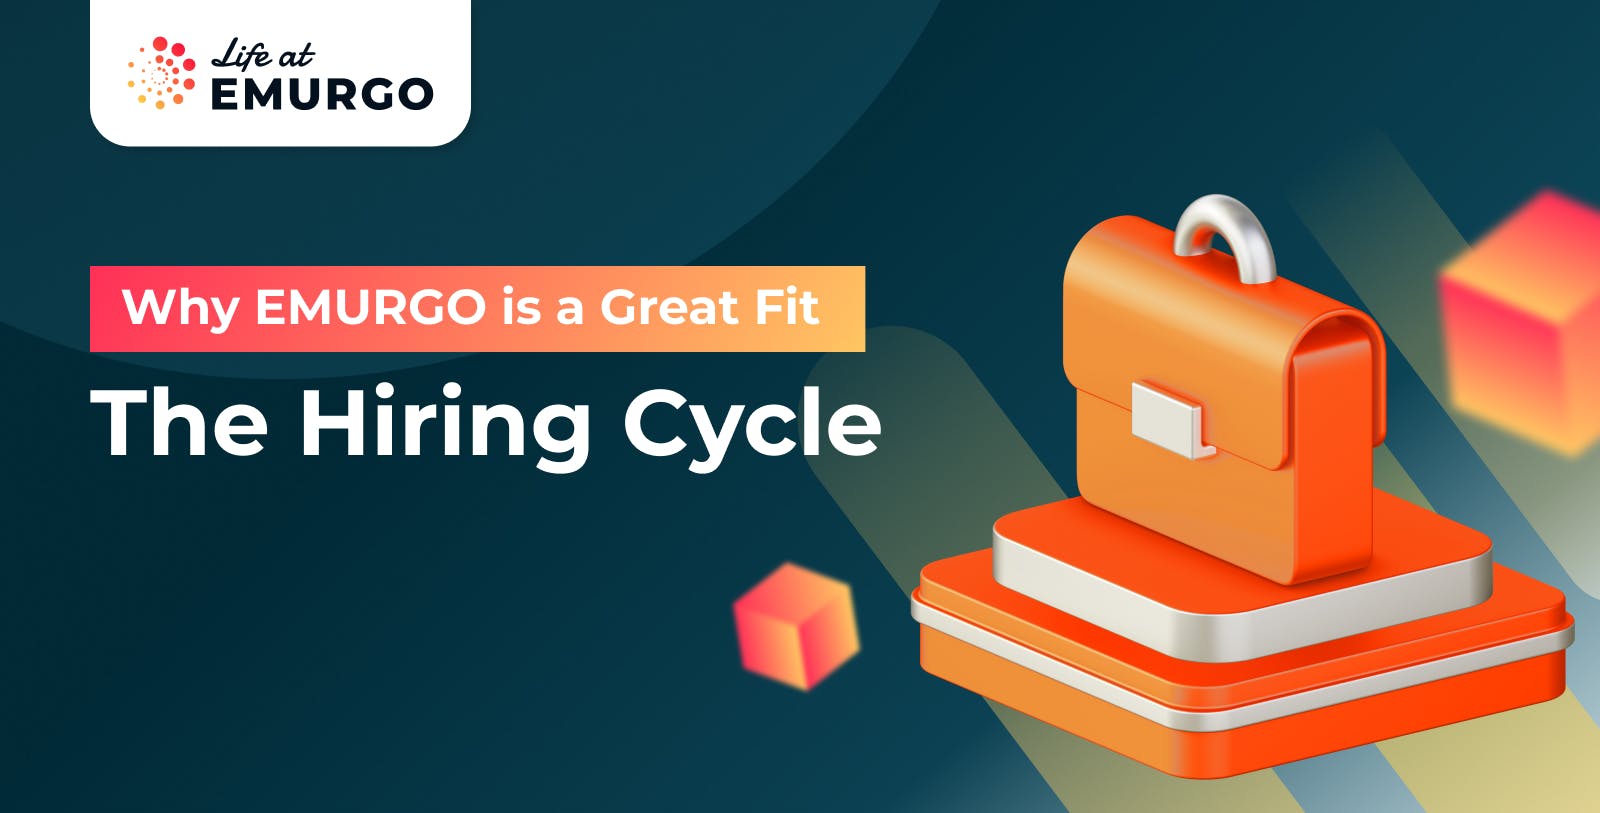 Blog-Series-Why-EMURGO-is-a-Great-Fit-The-Hiring-Cycle-1.jpg